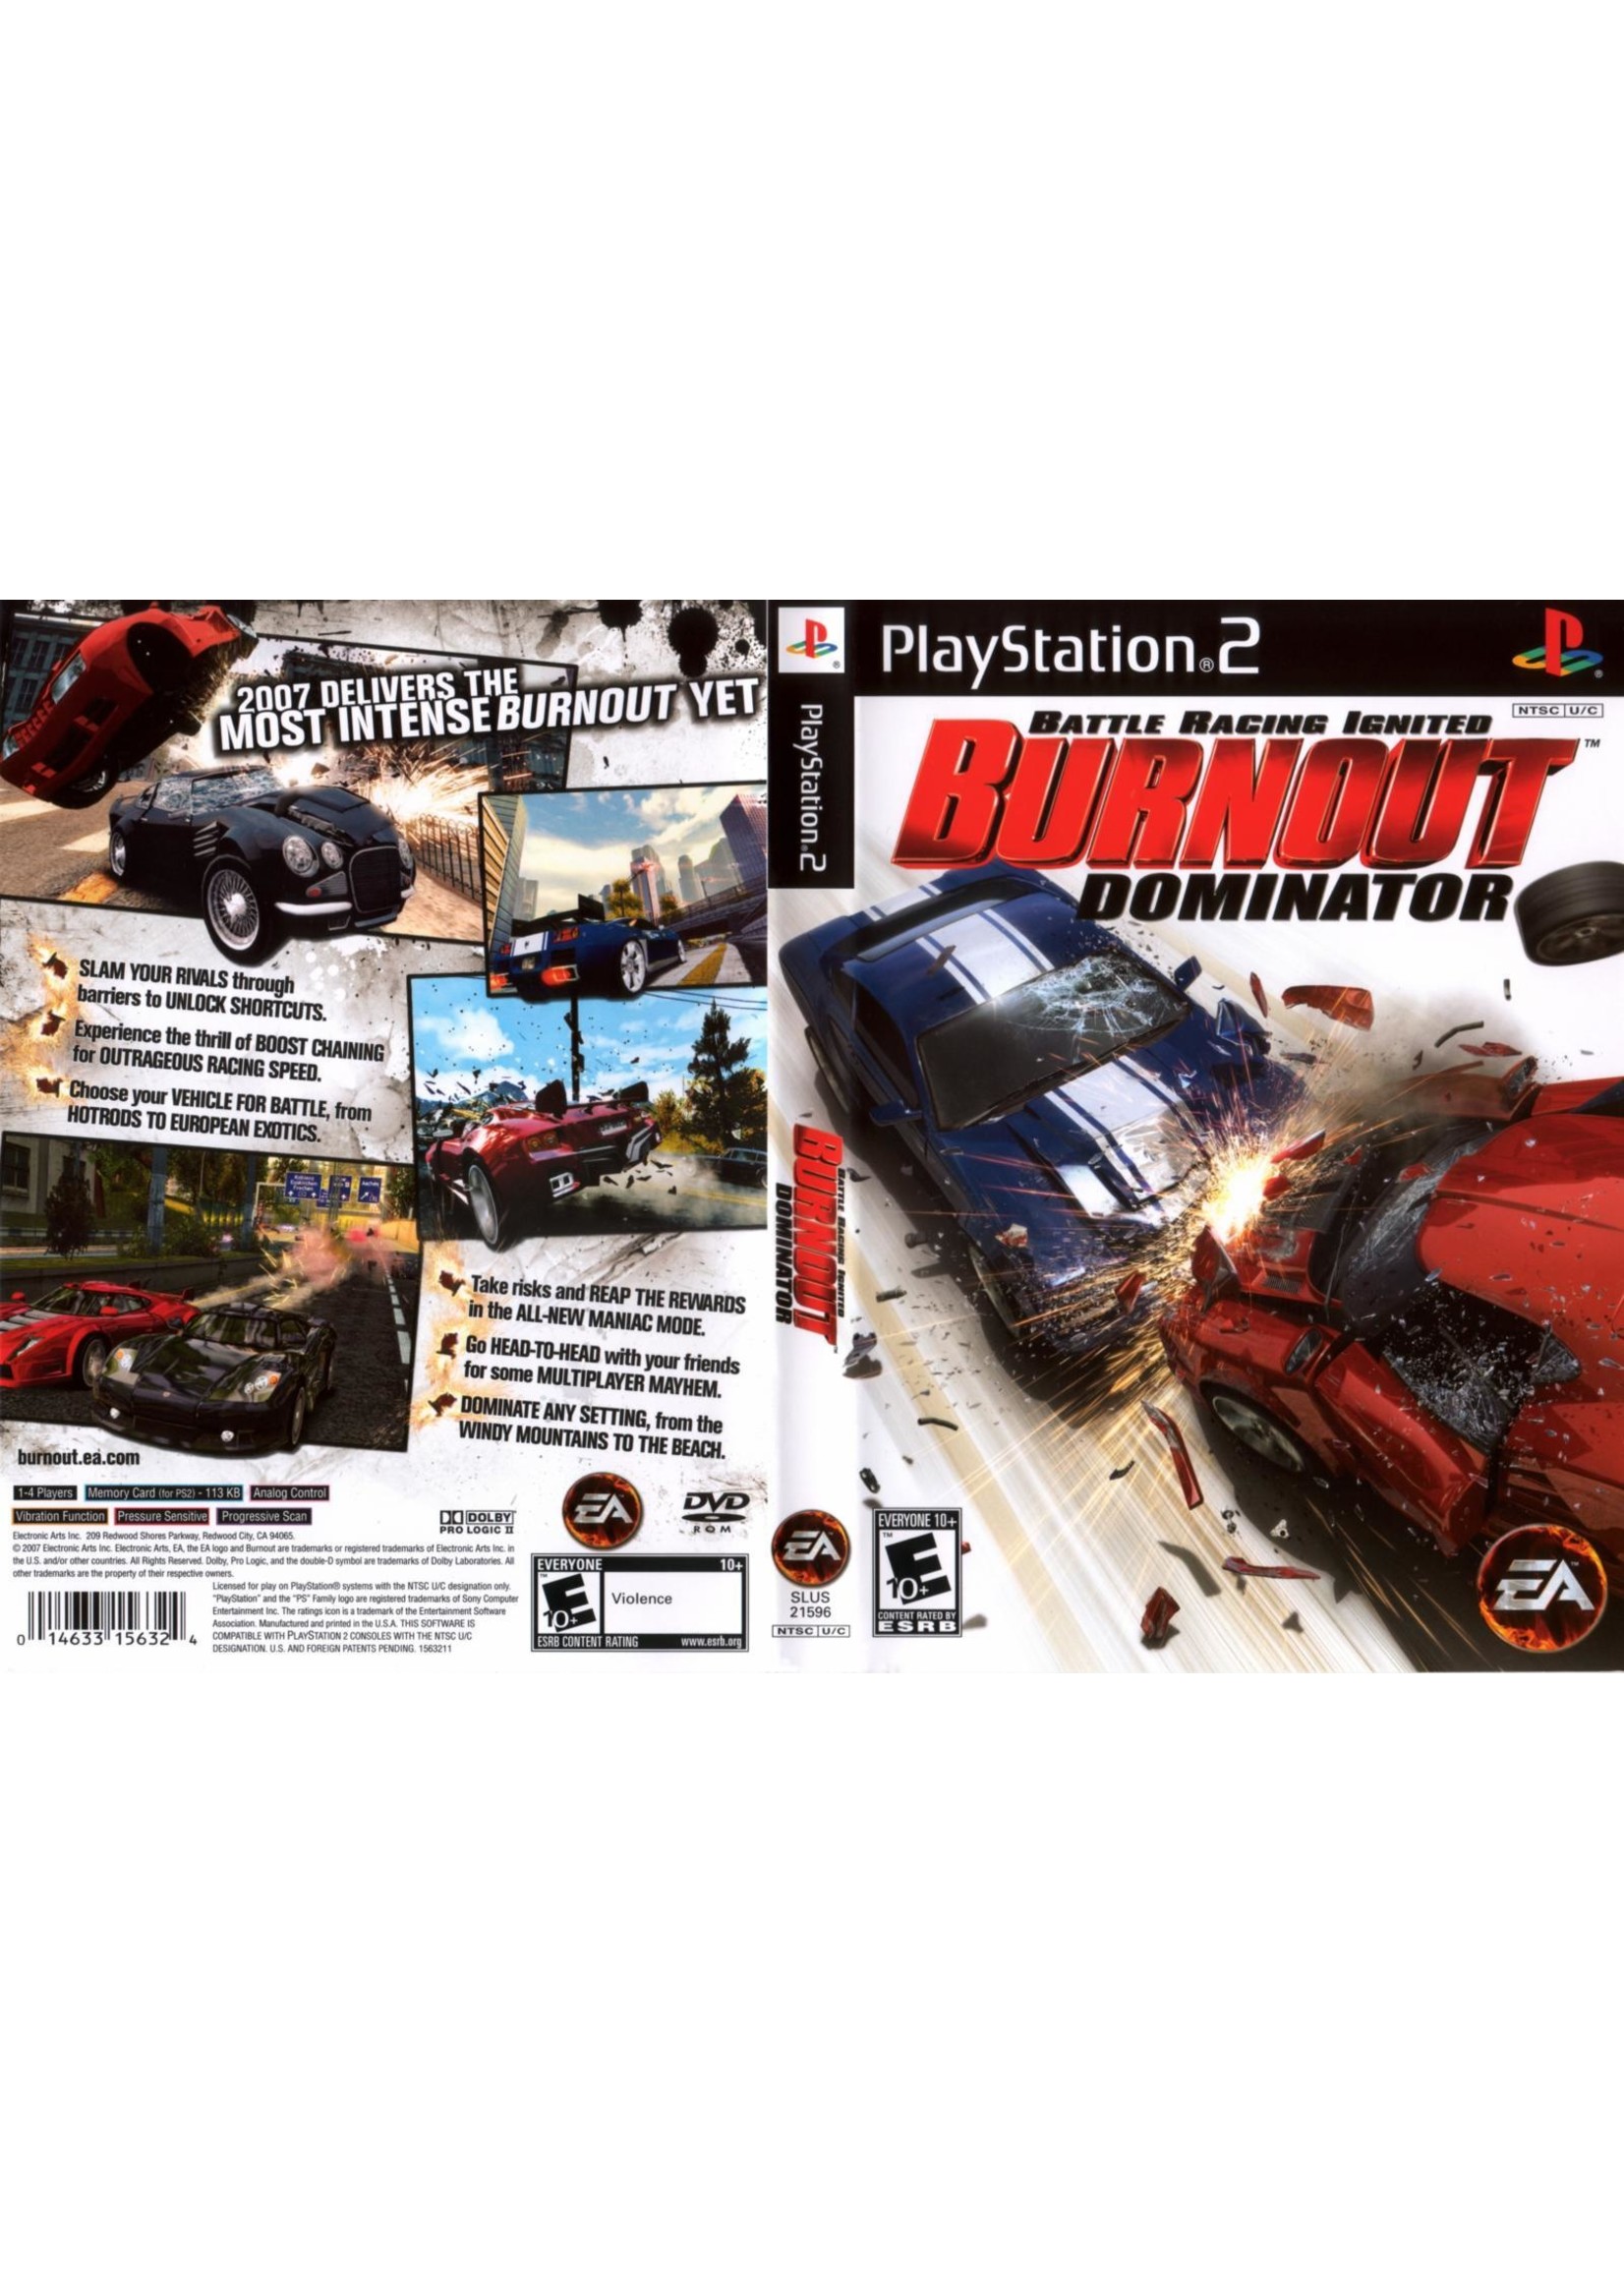 Sony Playstation 2 (PS2) Burnout Dominator